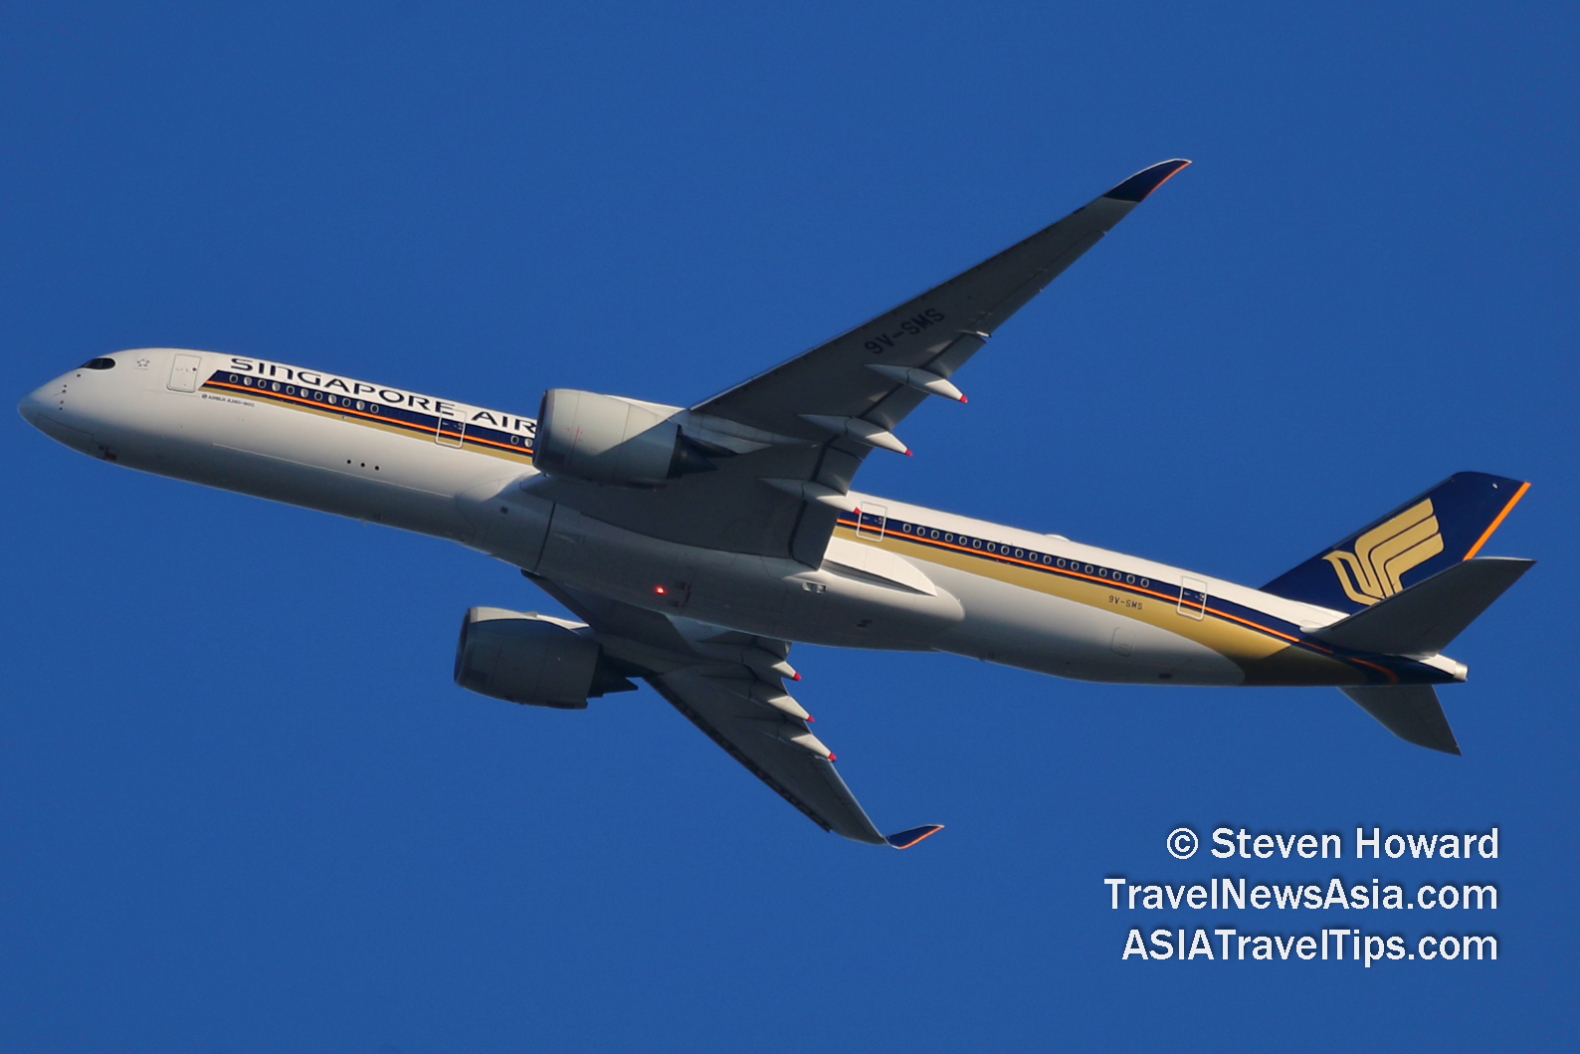 Singapore Airlines A350-900 reg: 9V-SMS. Picture by Steven Howard of TravelNewsAsia.com Click to enlarge.